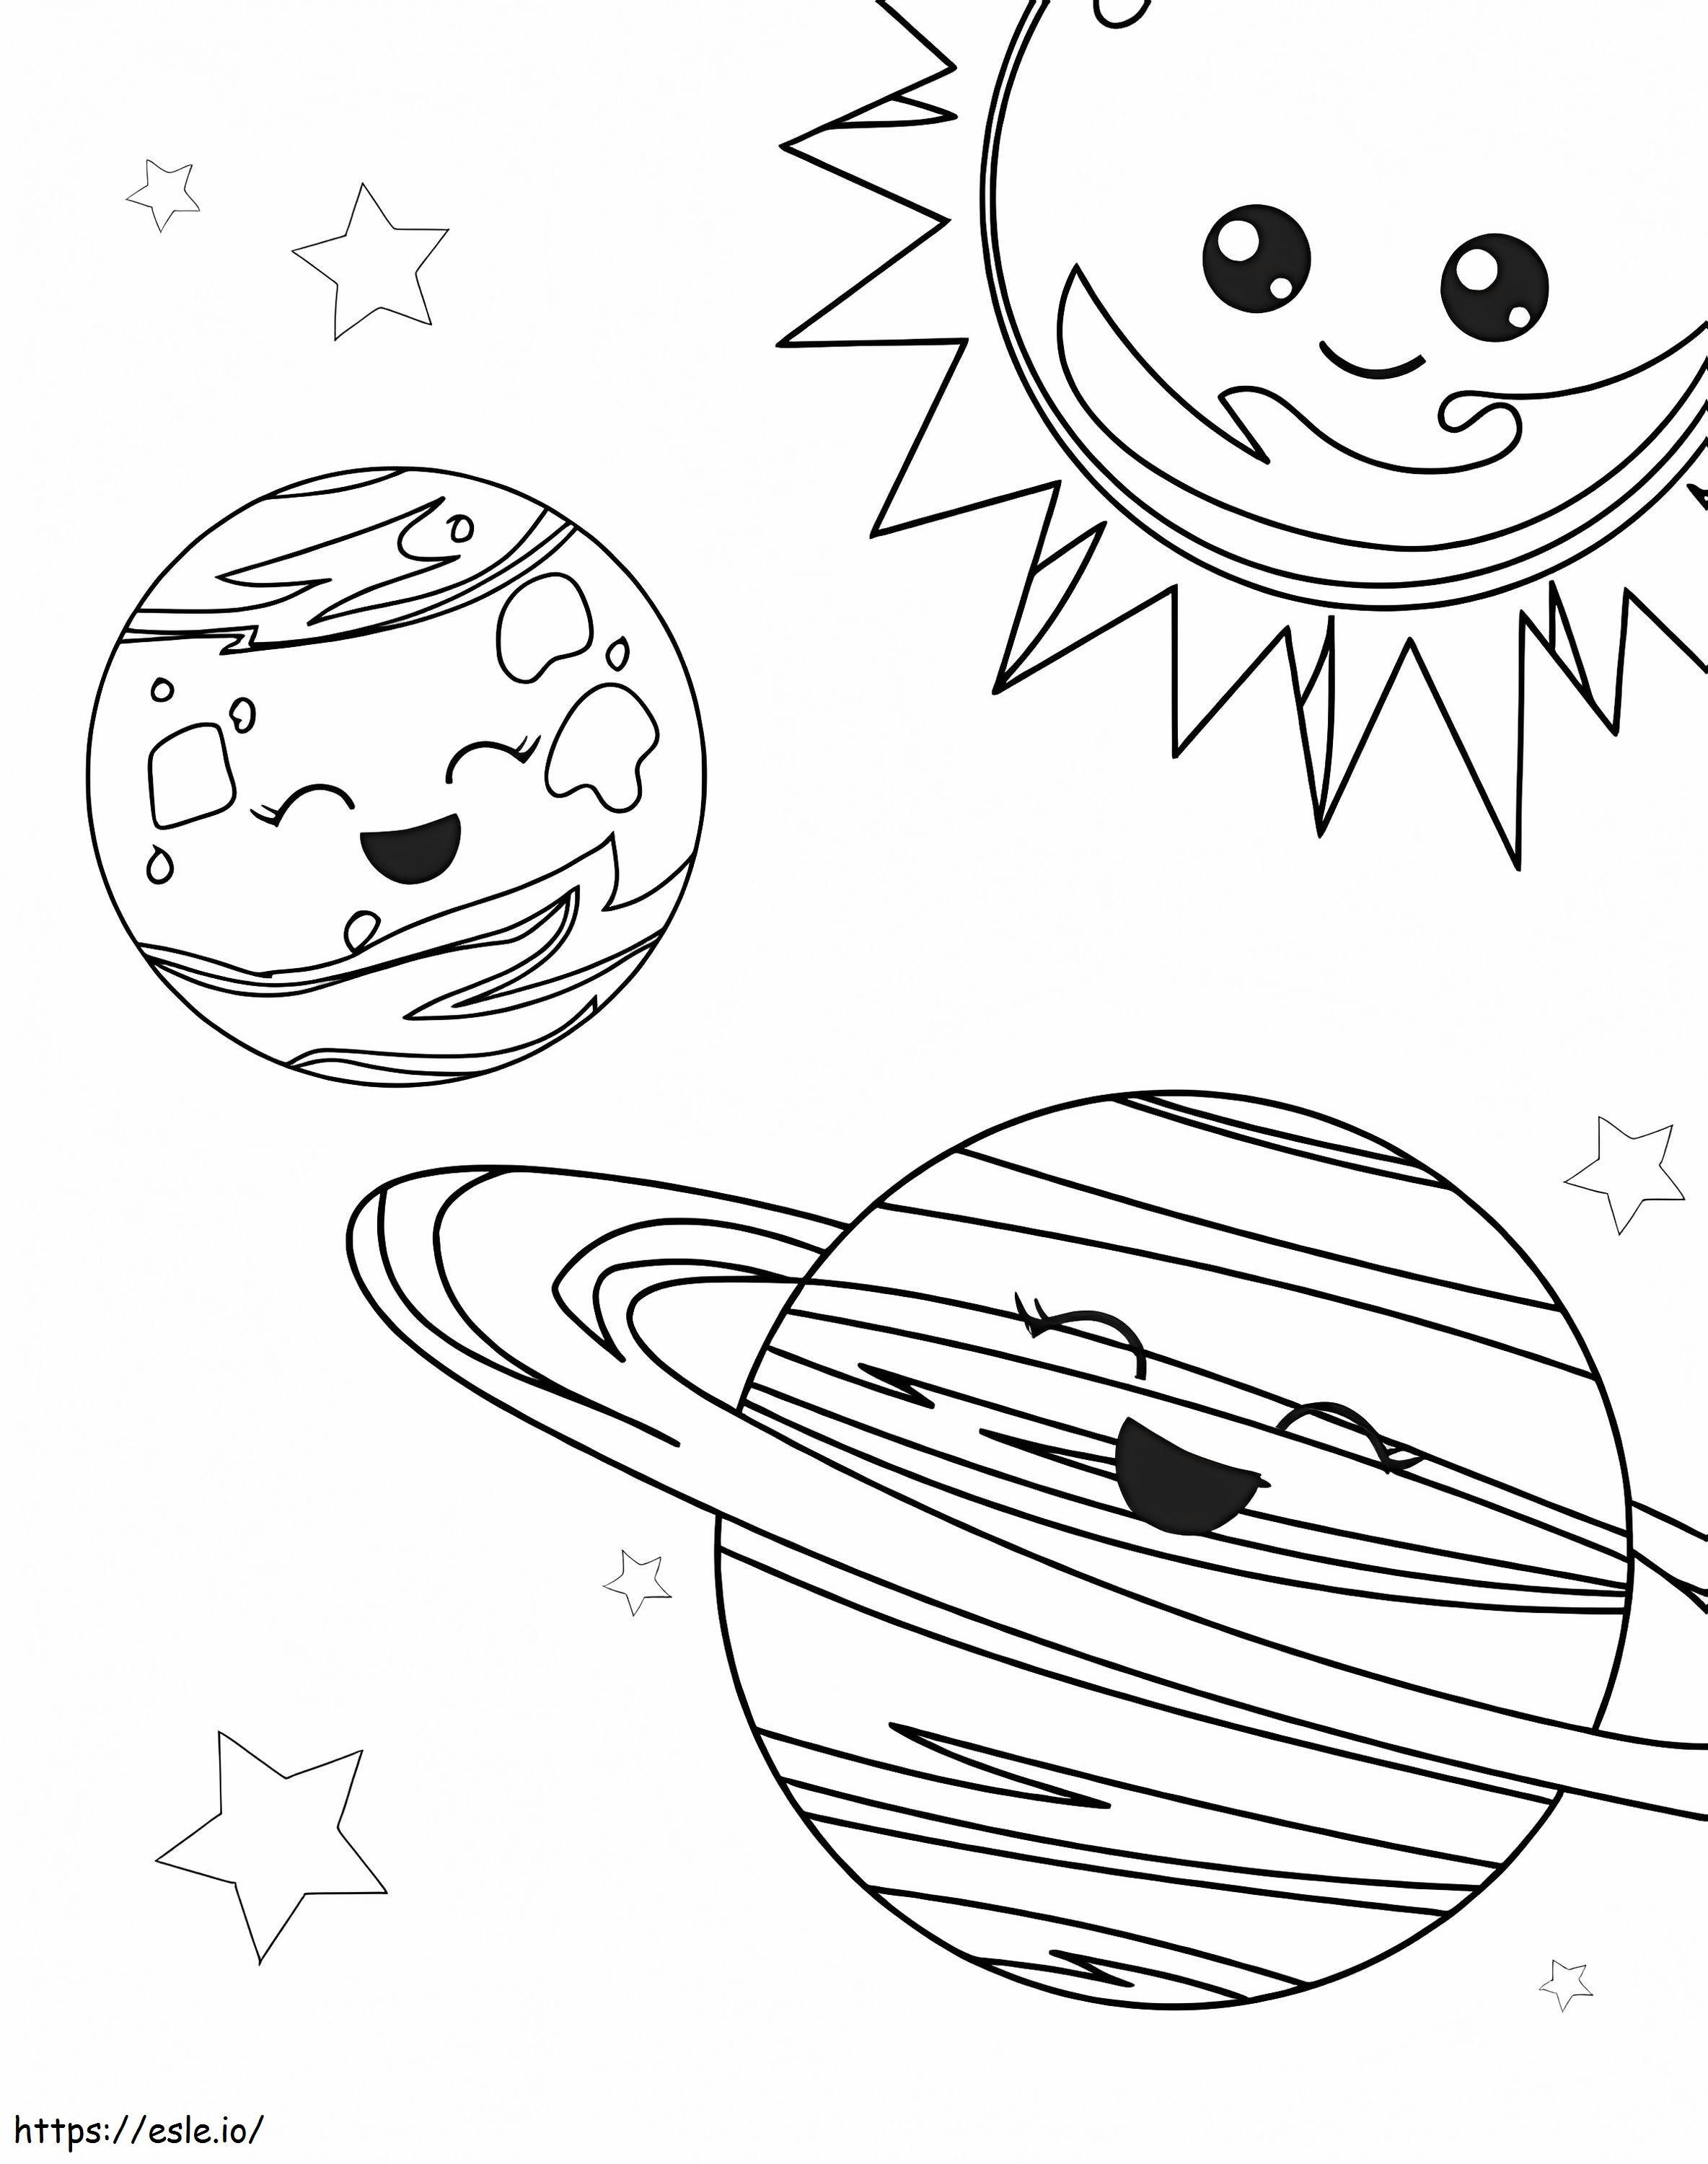 Three Fun Planets In Space coloring page